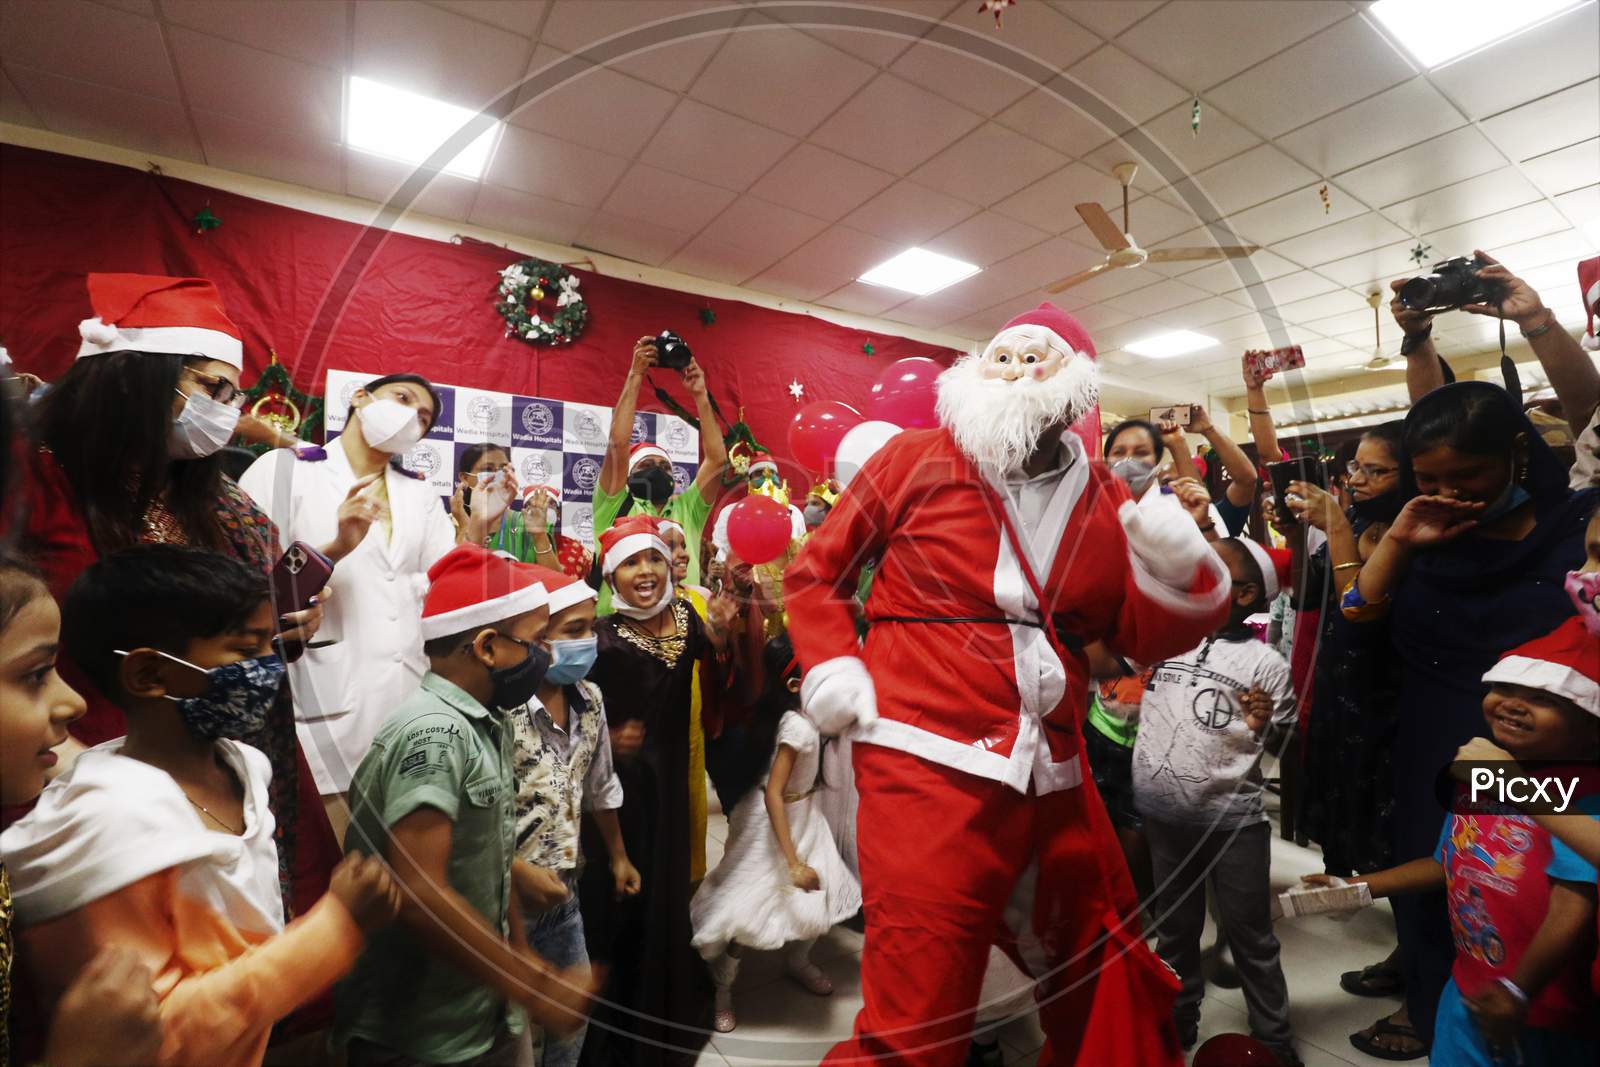 A man dressed as Santa Claus dances with patients during Christmas celebration, at Wadia Hospital For Children in Mumbai, India on December, 2020.